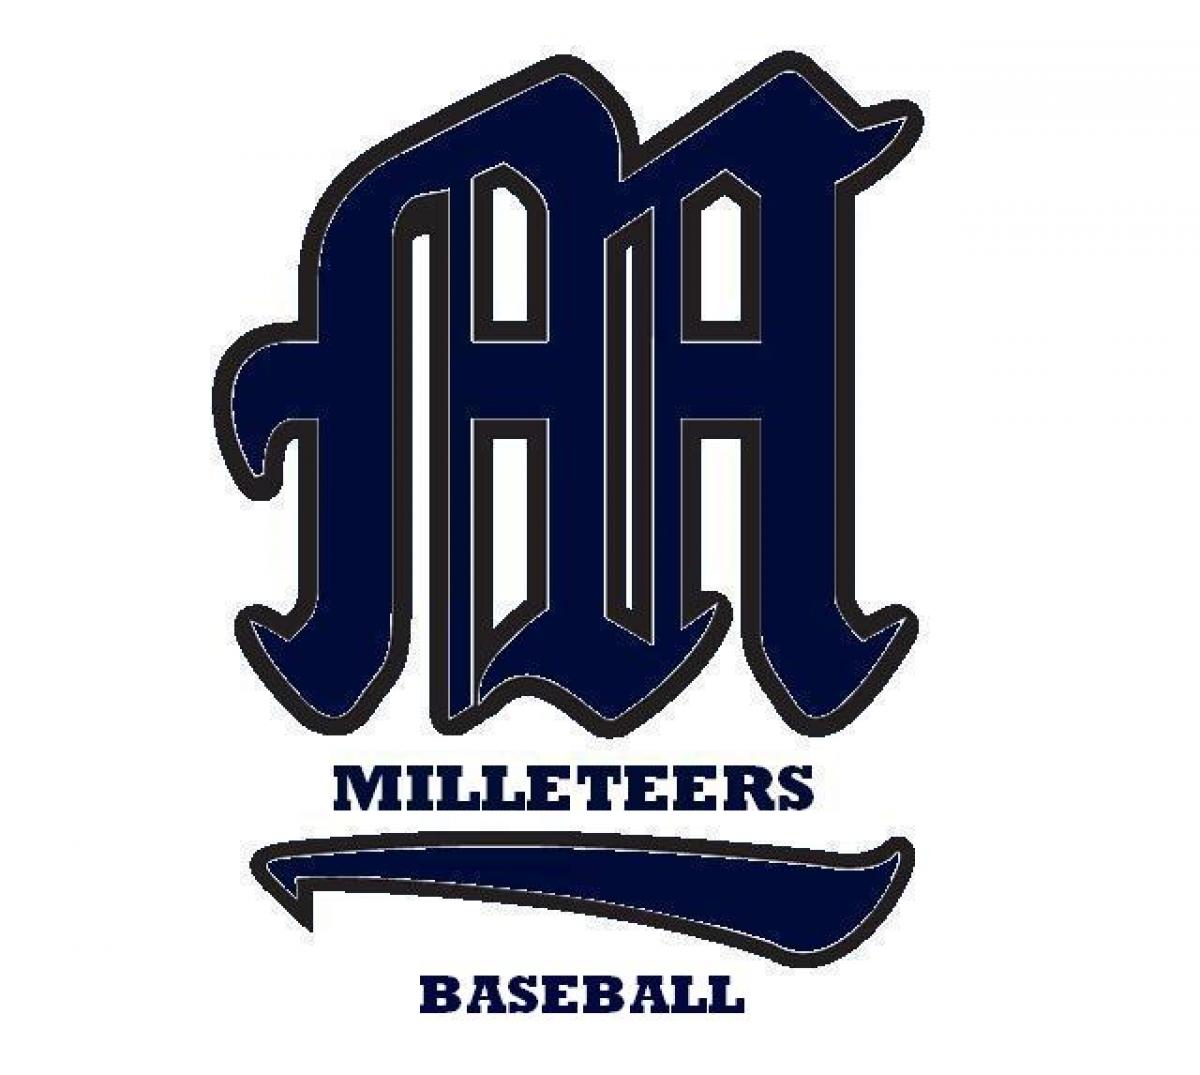 Milleteers Almost Play A Complete Game, Beat Royals